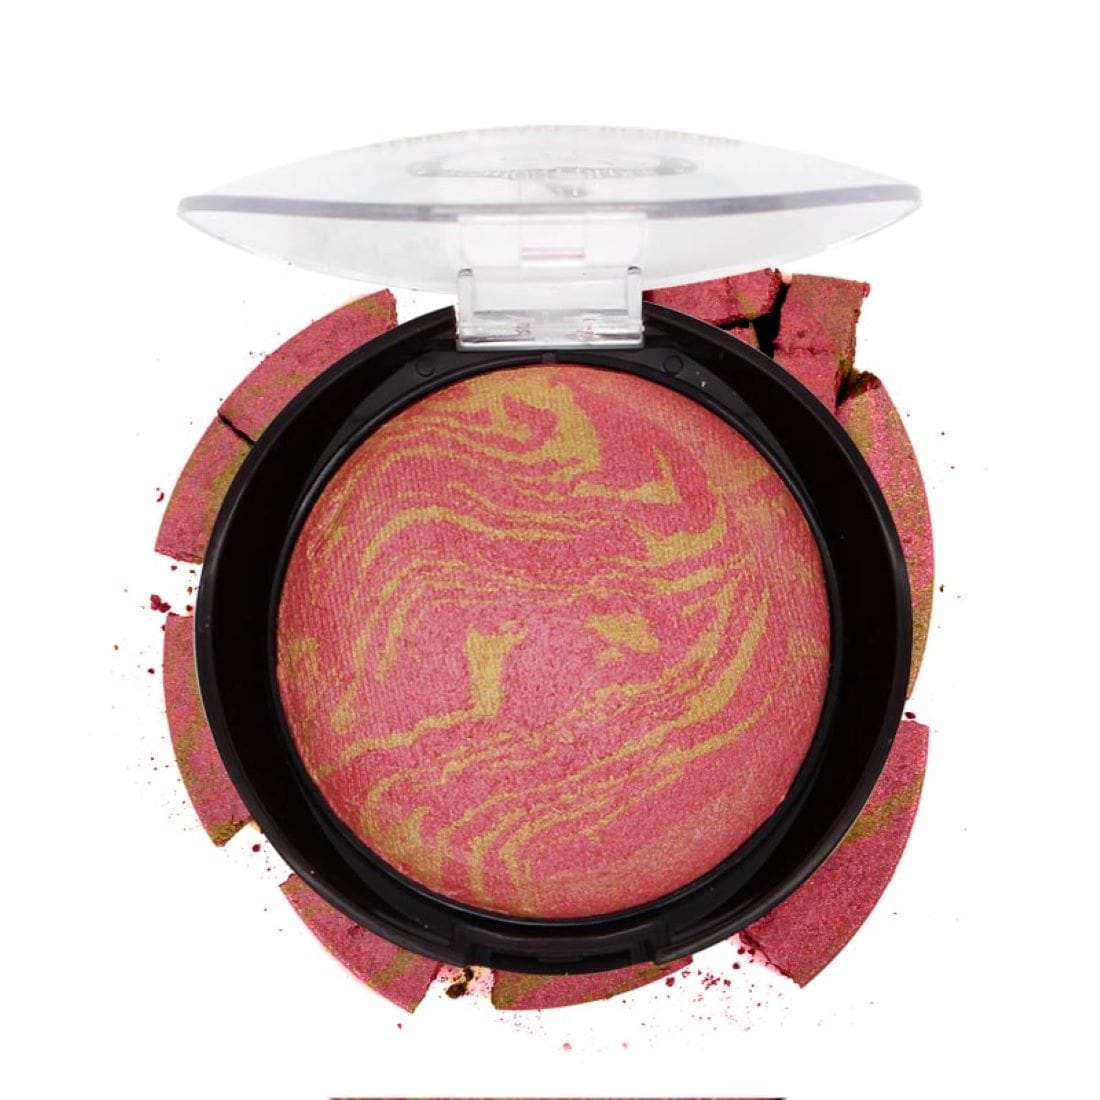 Waterproof Tera Cotta BlusherThe intensely pigmented blush that adds a pop of color to the cheeks Lightweight formula for a comfortable wear Easy to blend formula for a naturally flushed look This professional blusher has an easily blendable formula that can flatter any skin tone complete your makeup look with this lightweight Fashion Colour Blusher that gives you comfortable wear all day long.